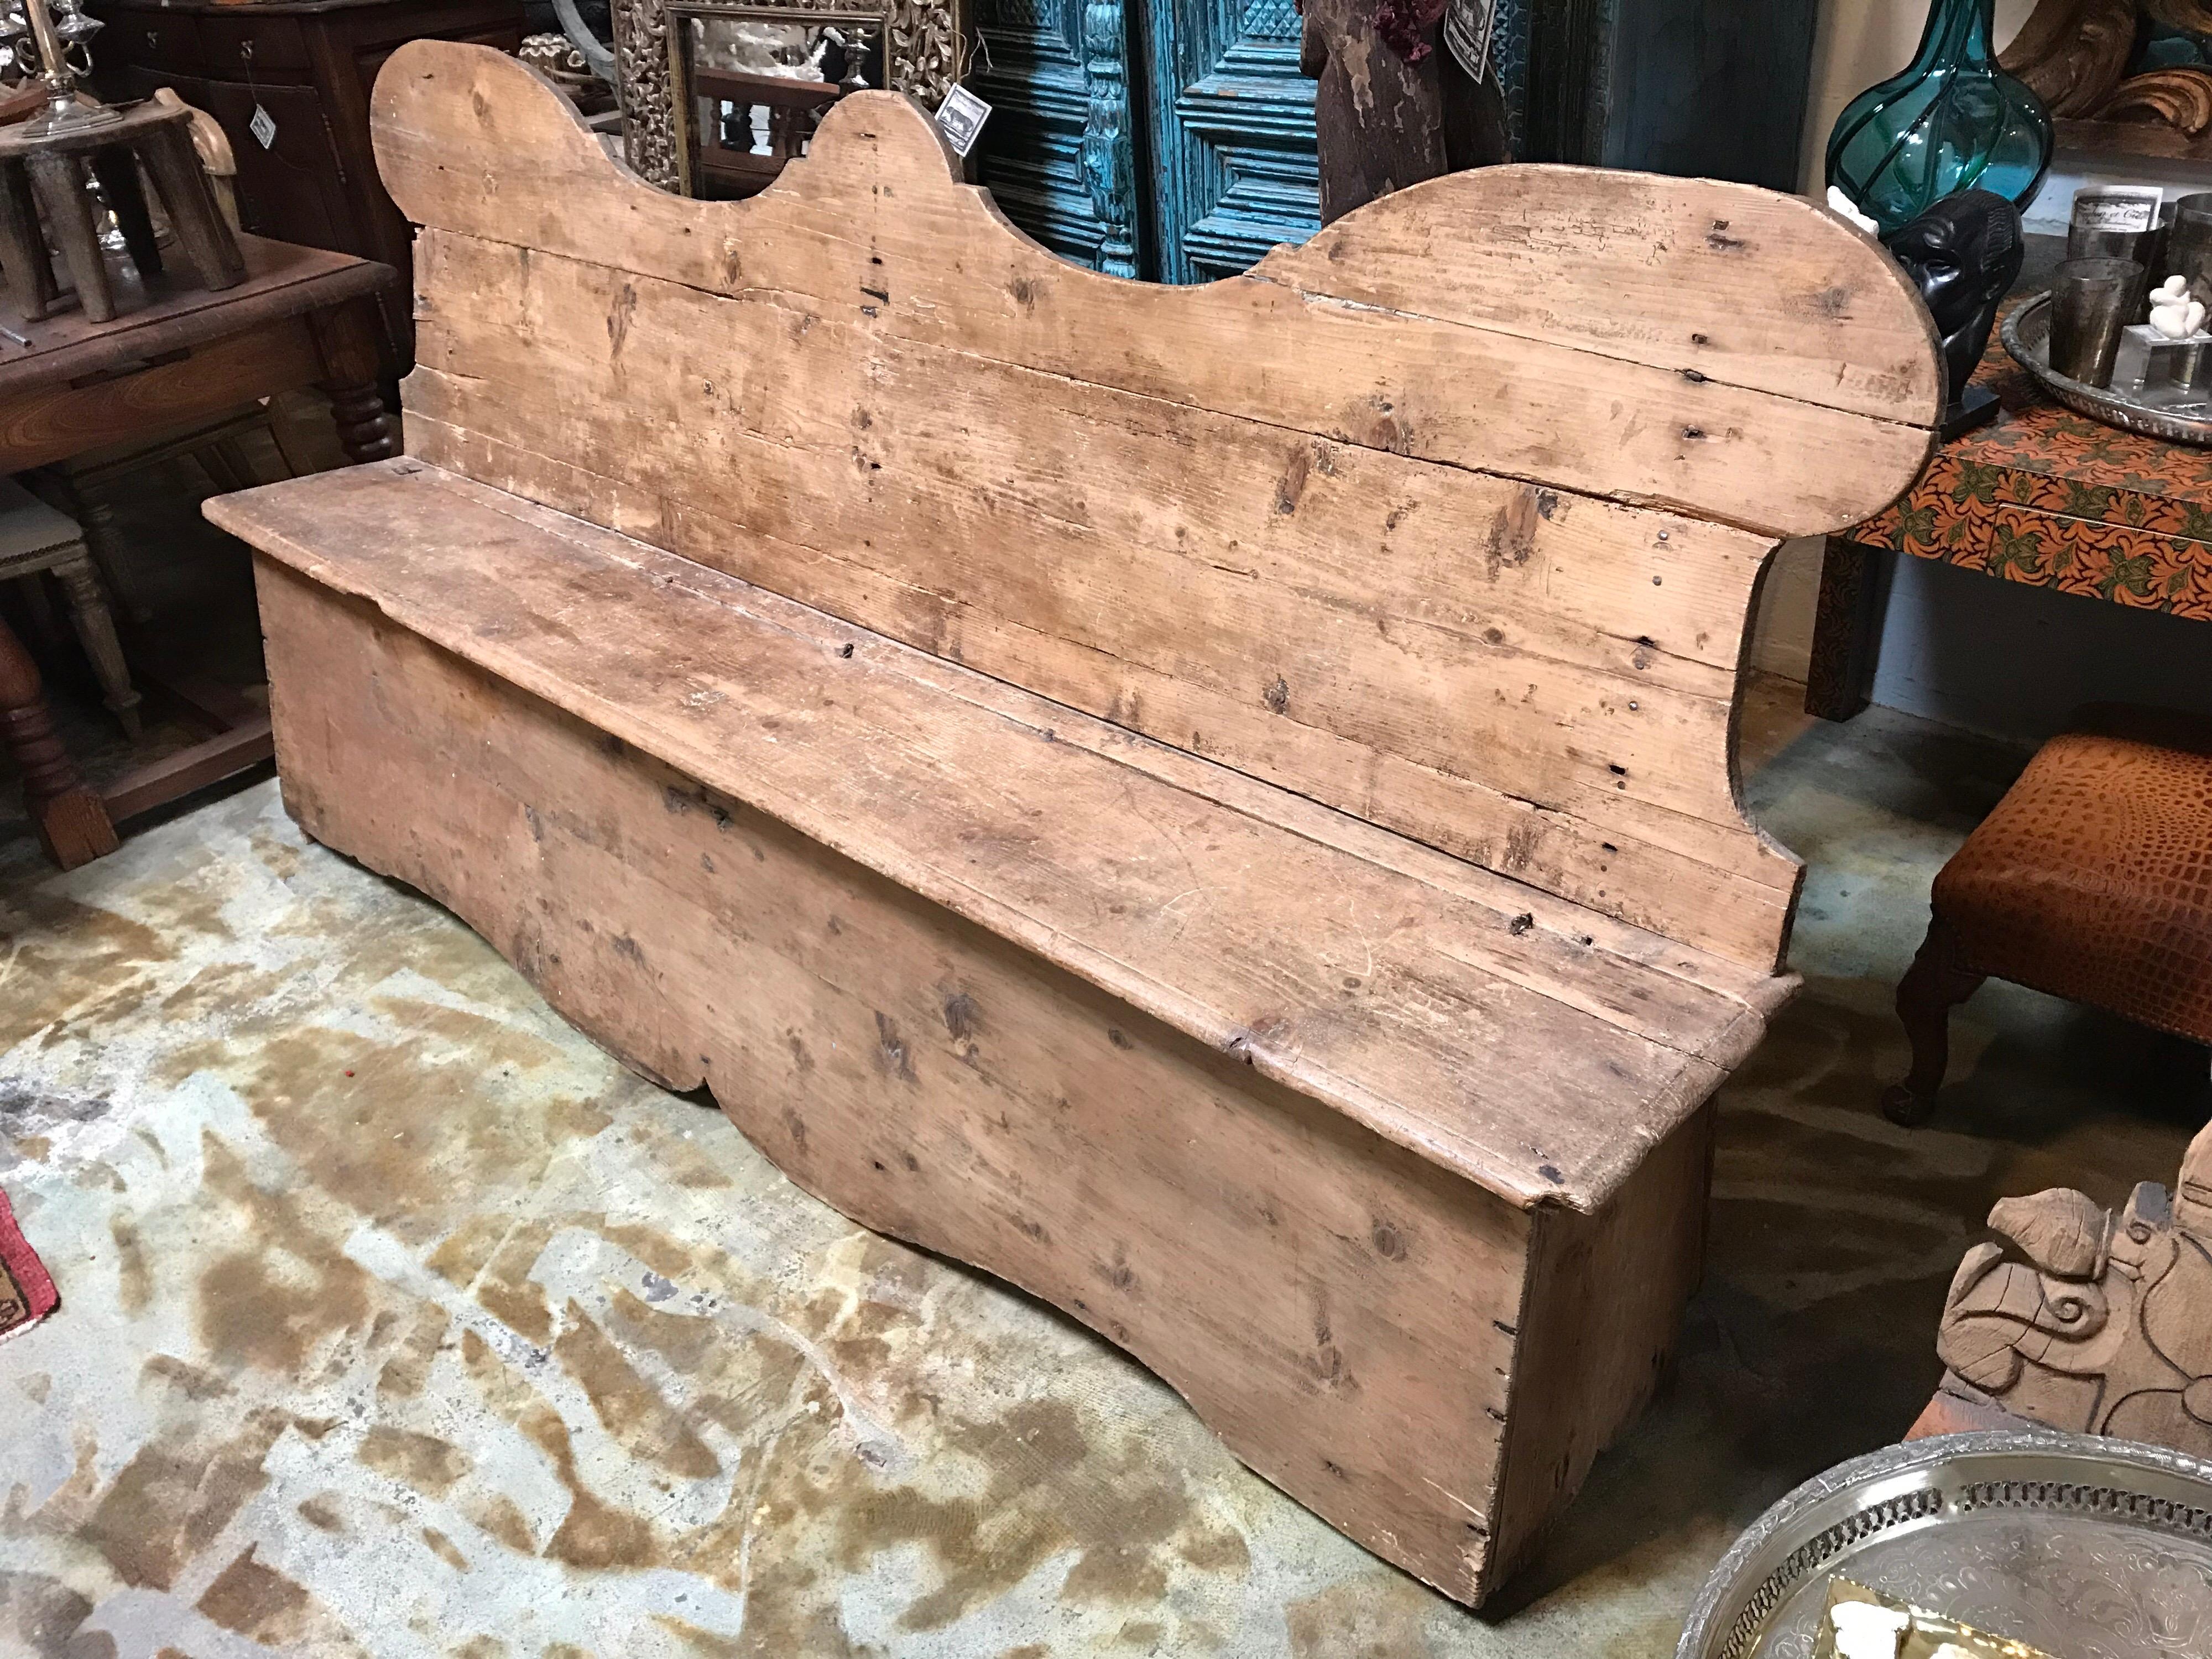 Wood bench. Made in the 18th century. Hinge opening seat for storage.